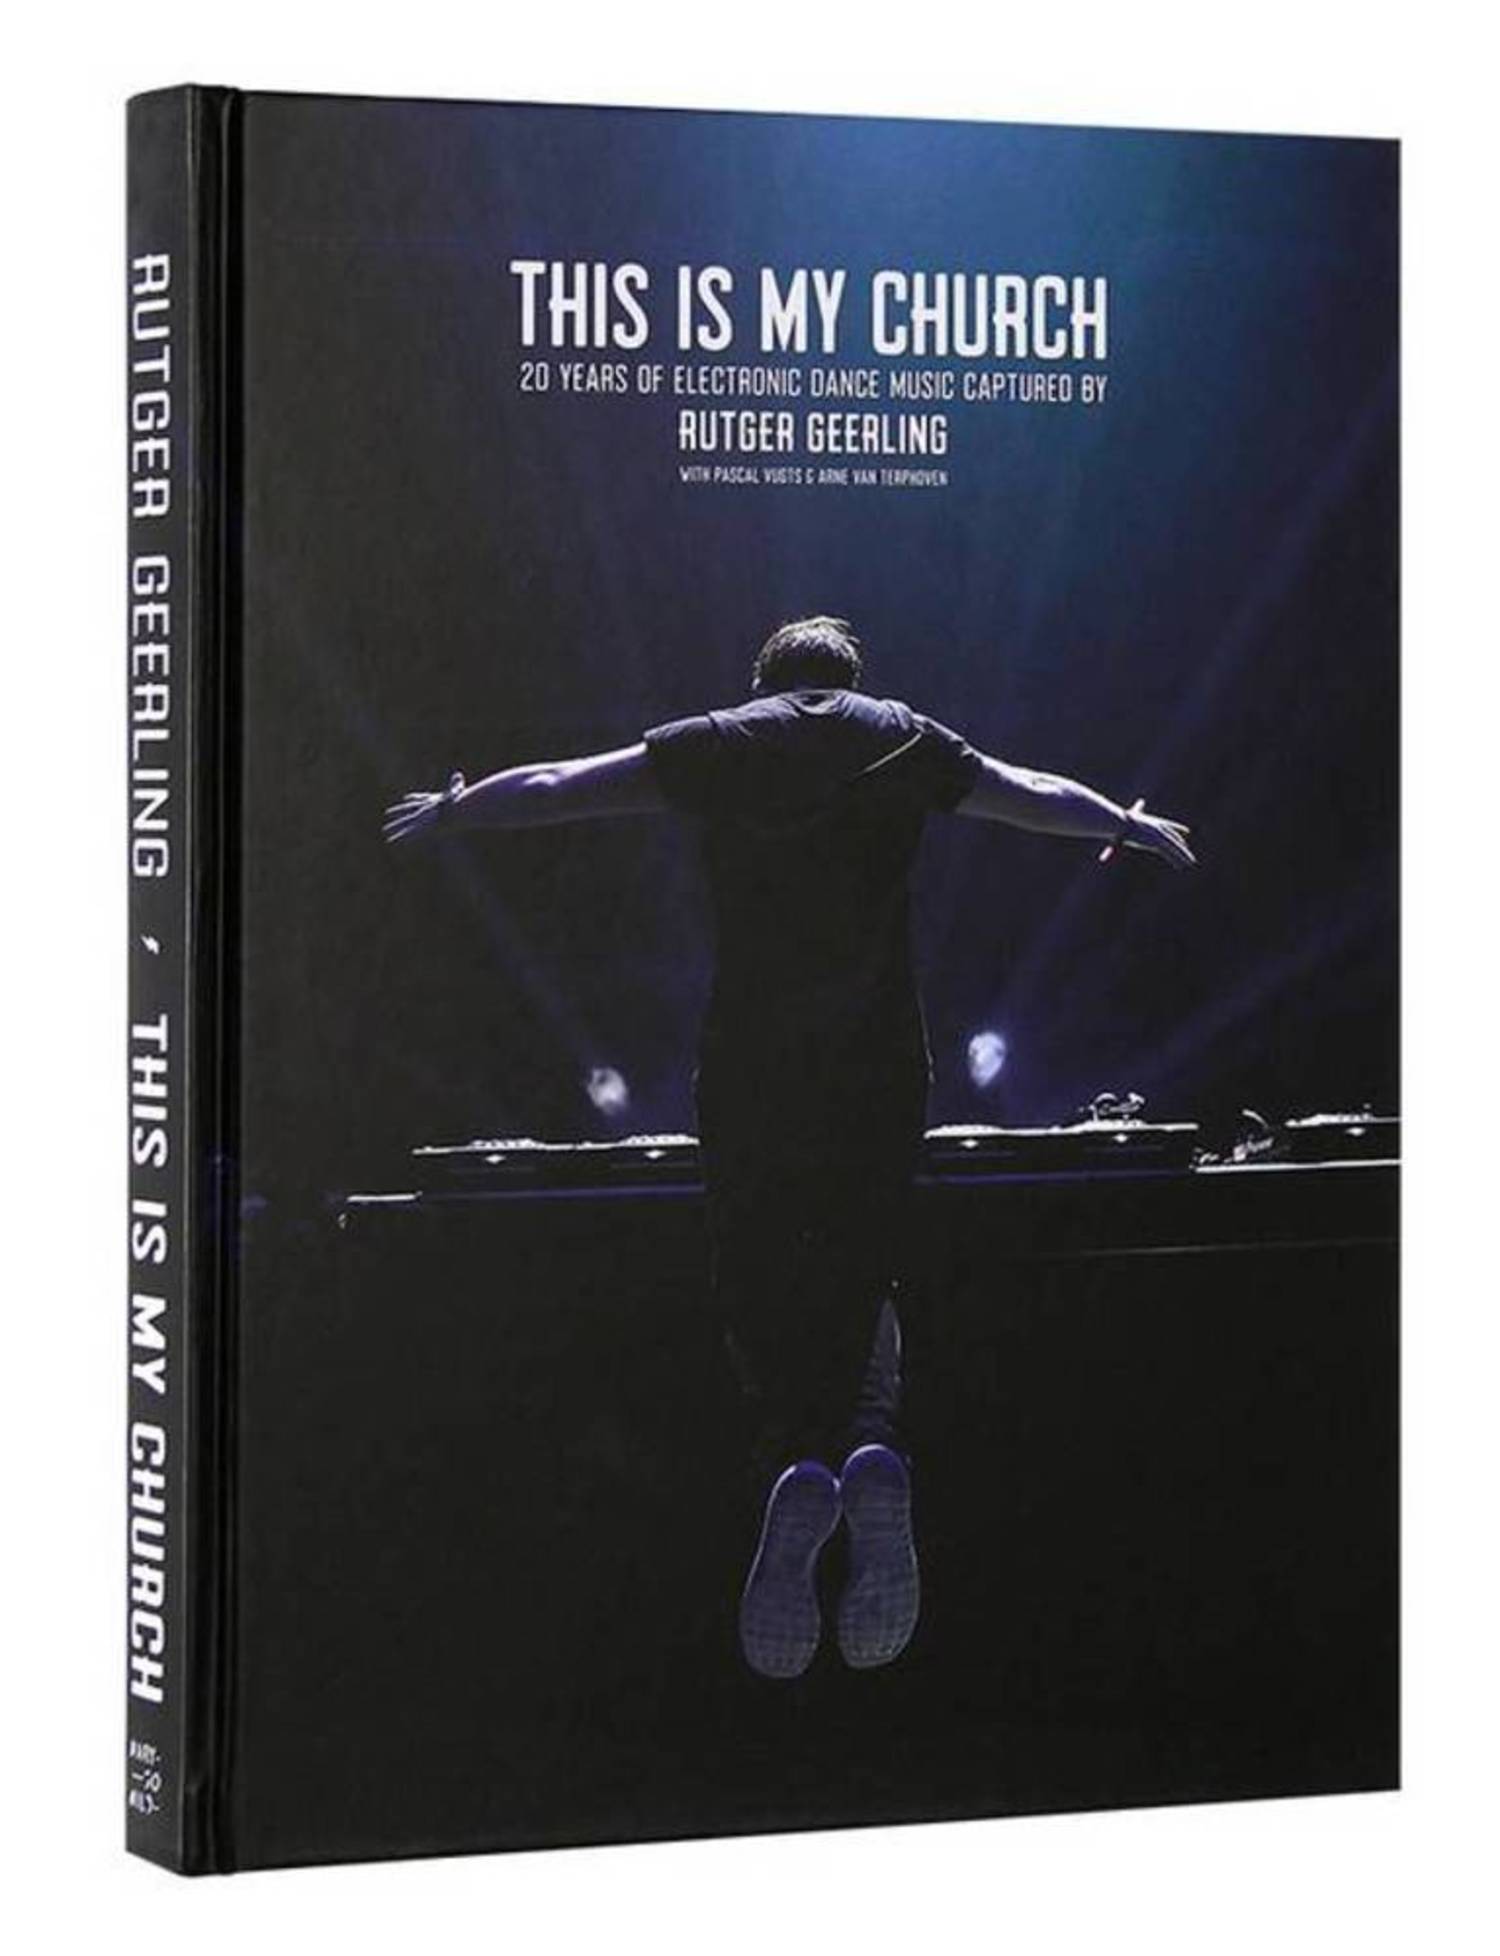 This Is My Church - 20 YEARS OF ELECTRONIC DANCE MUSIC 